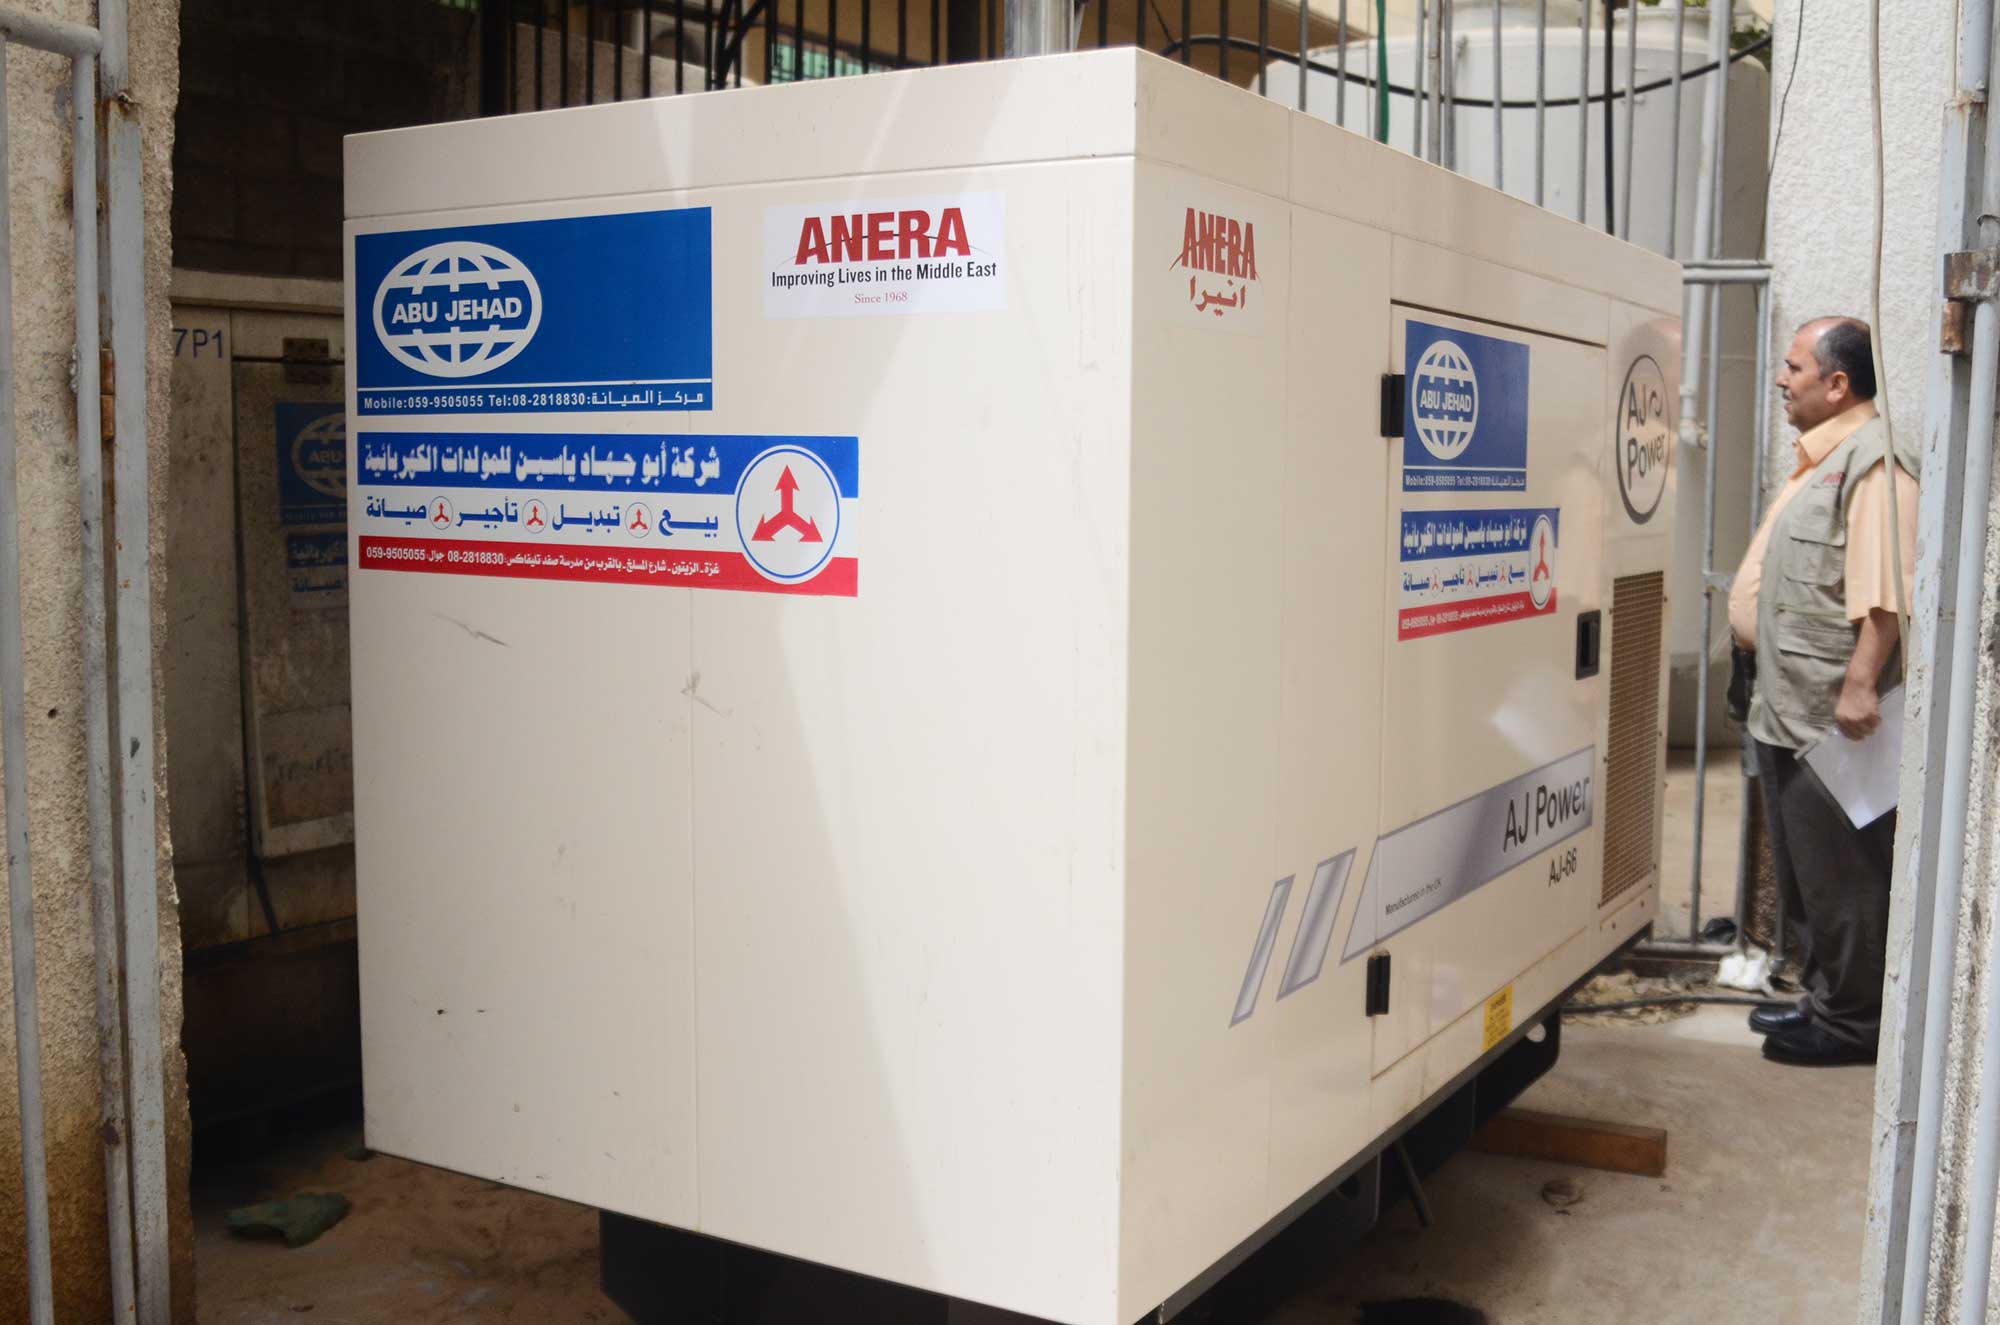 A new powerful generator ensures the blood bank remains operational during frequent Gaza power outages.